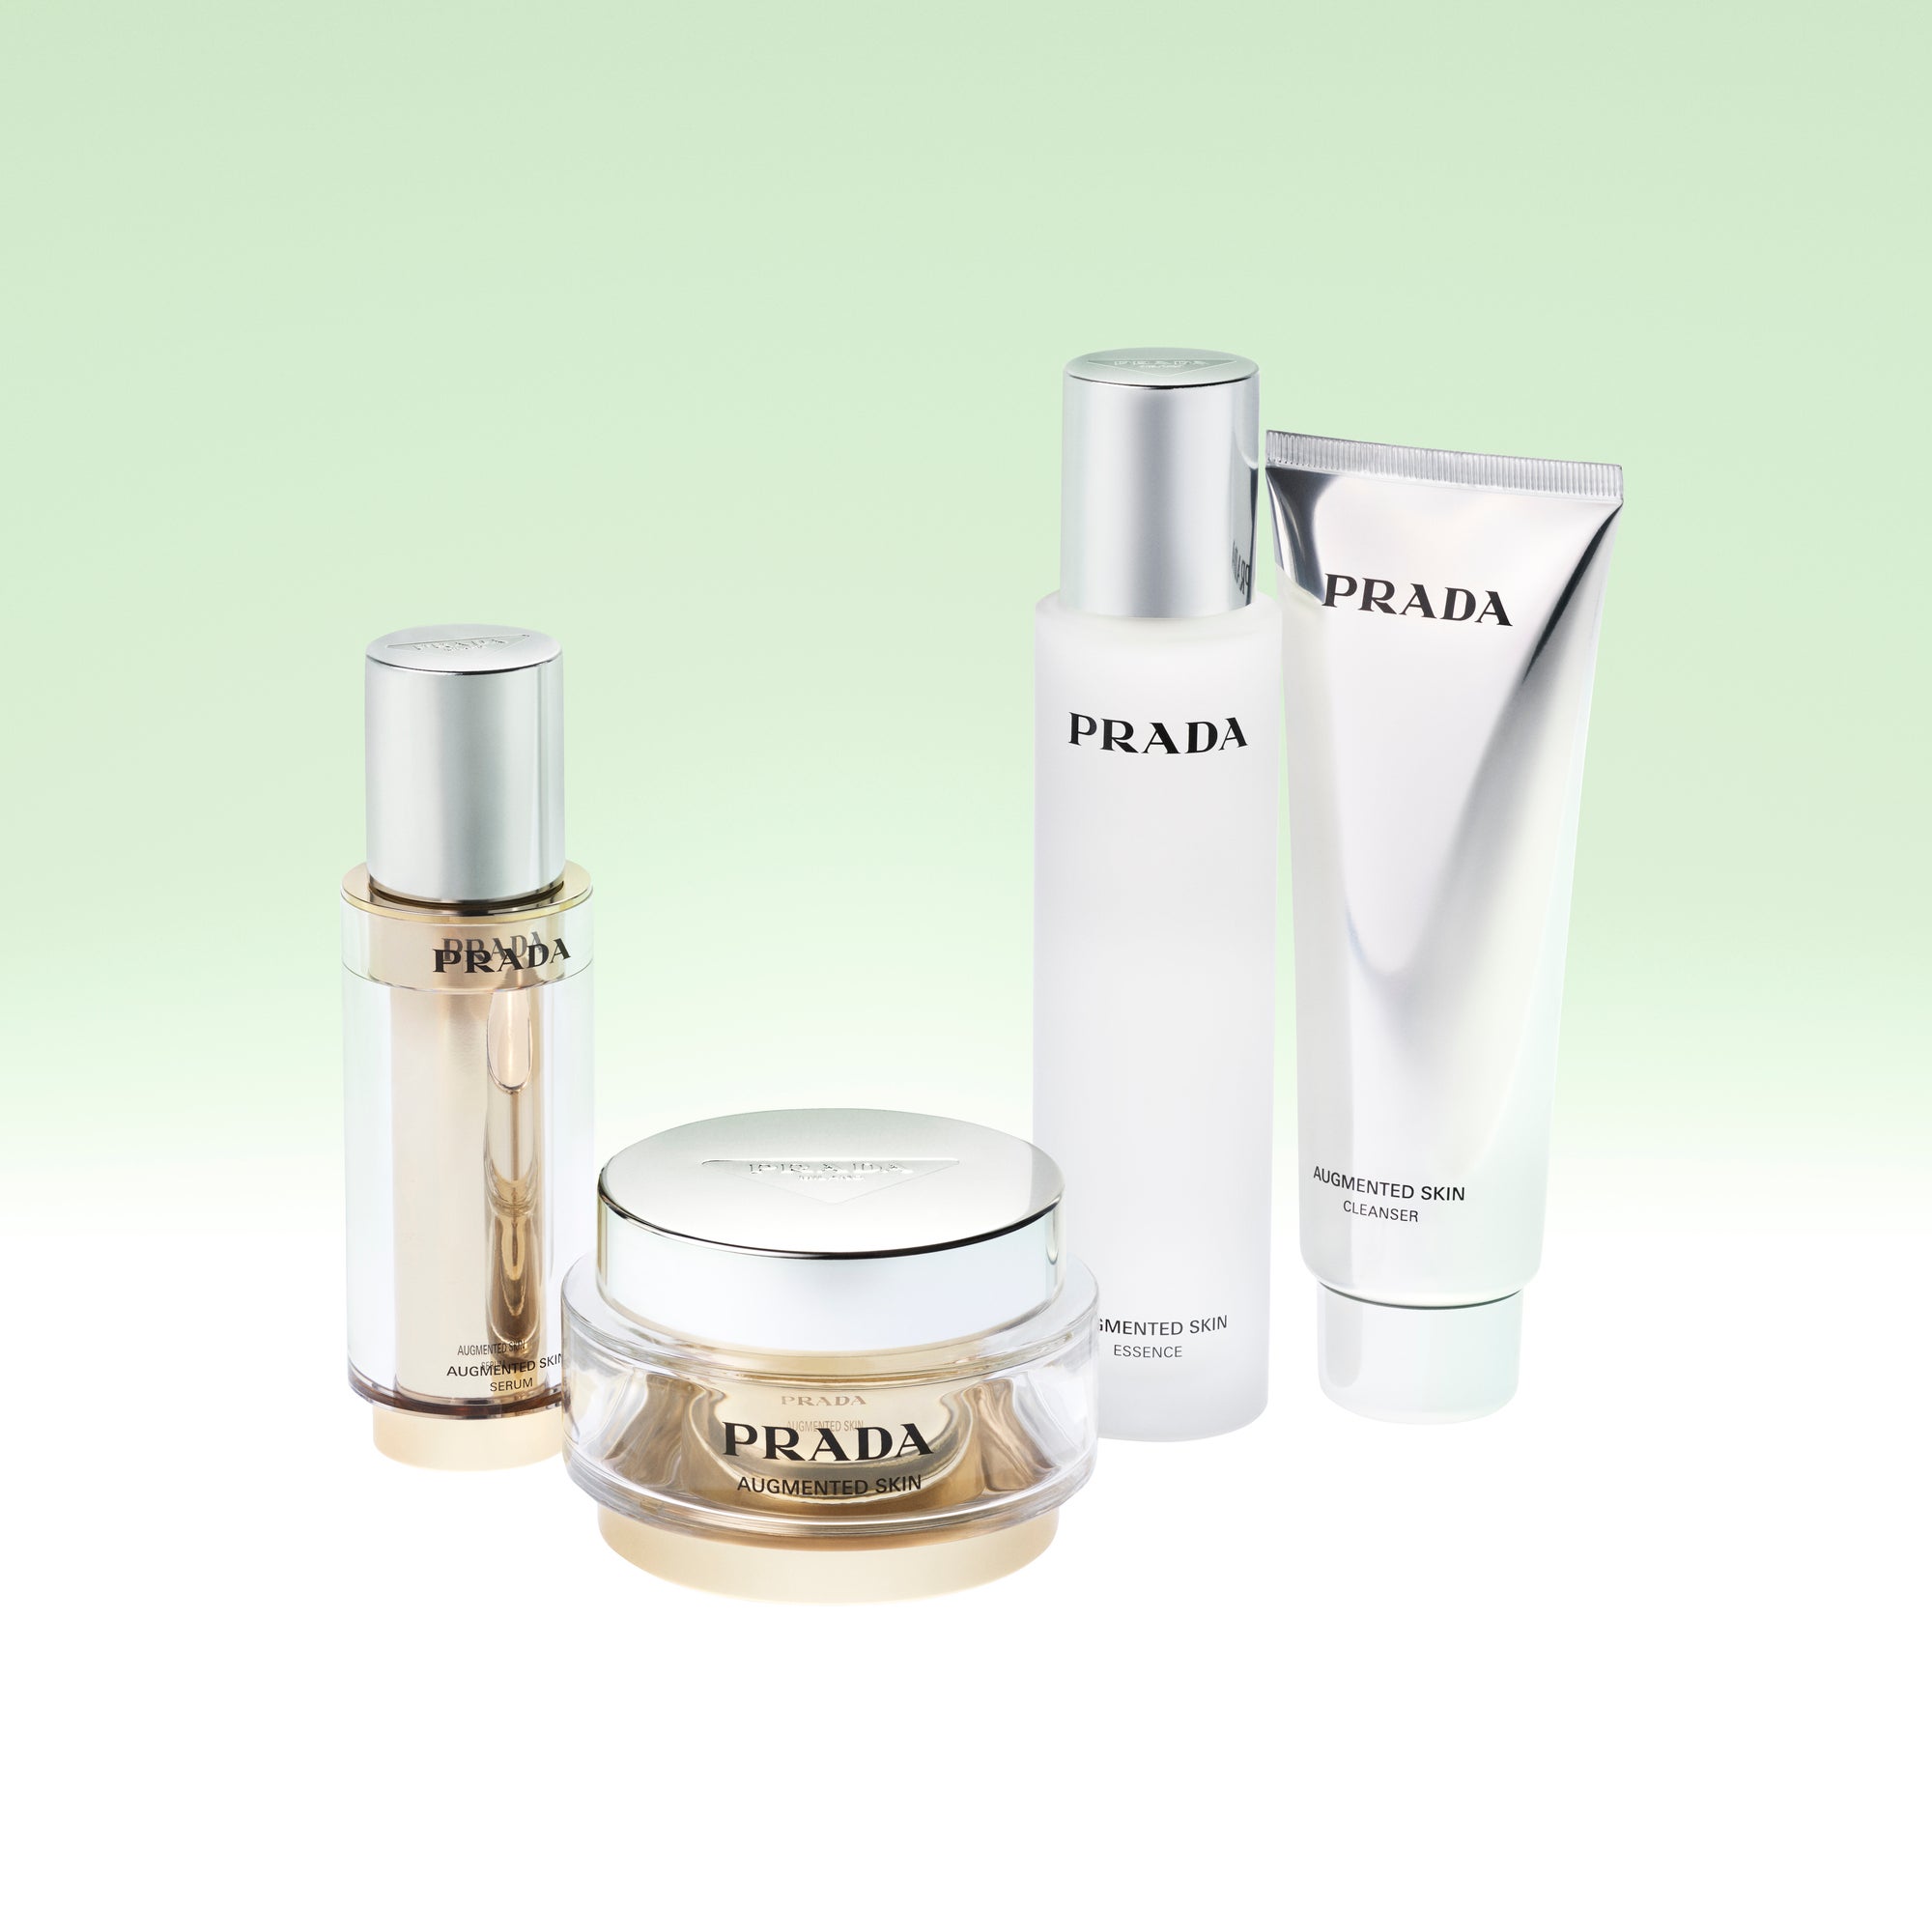 PRADA Launches New Skincare Collection At Nordstrom